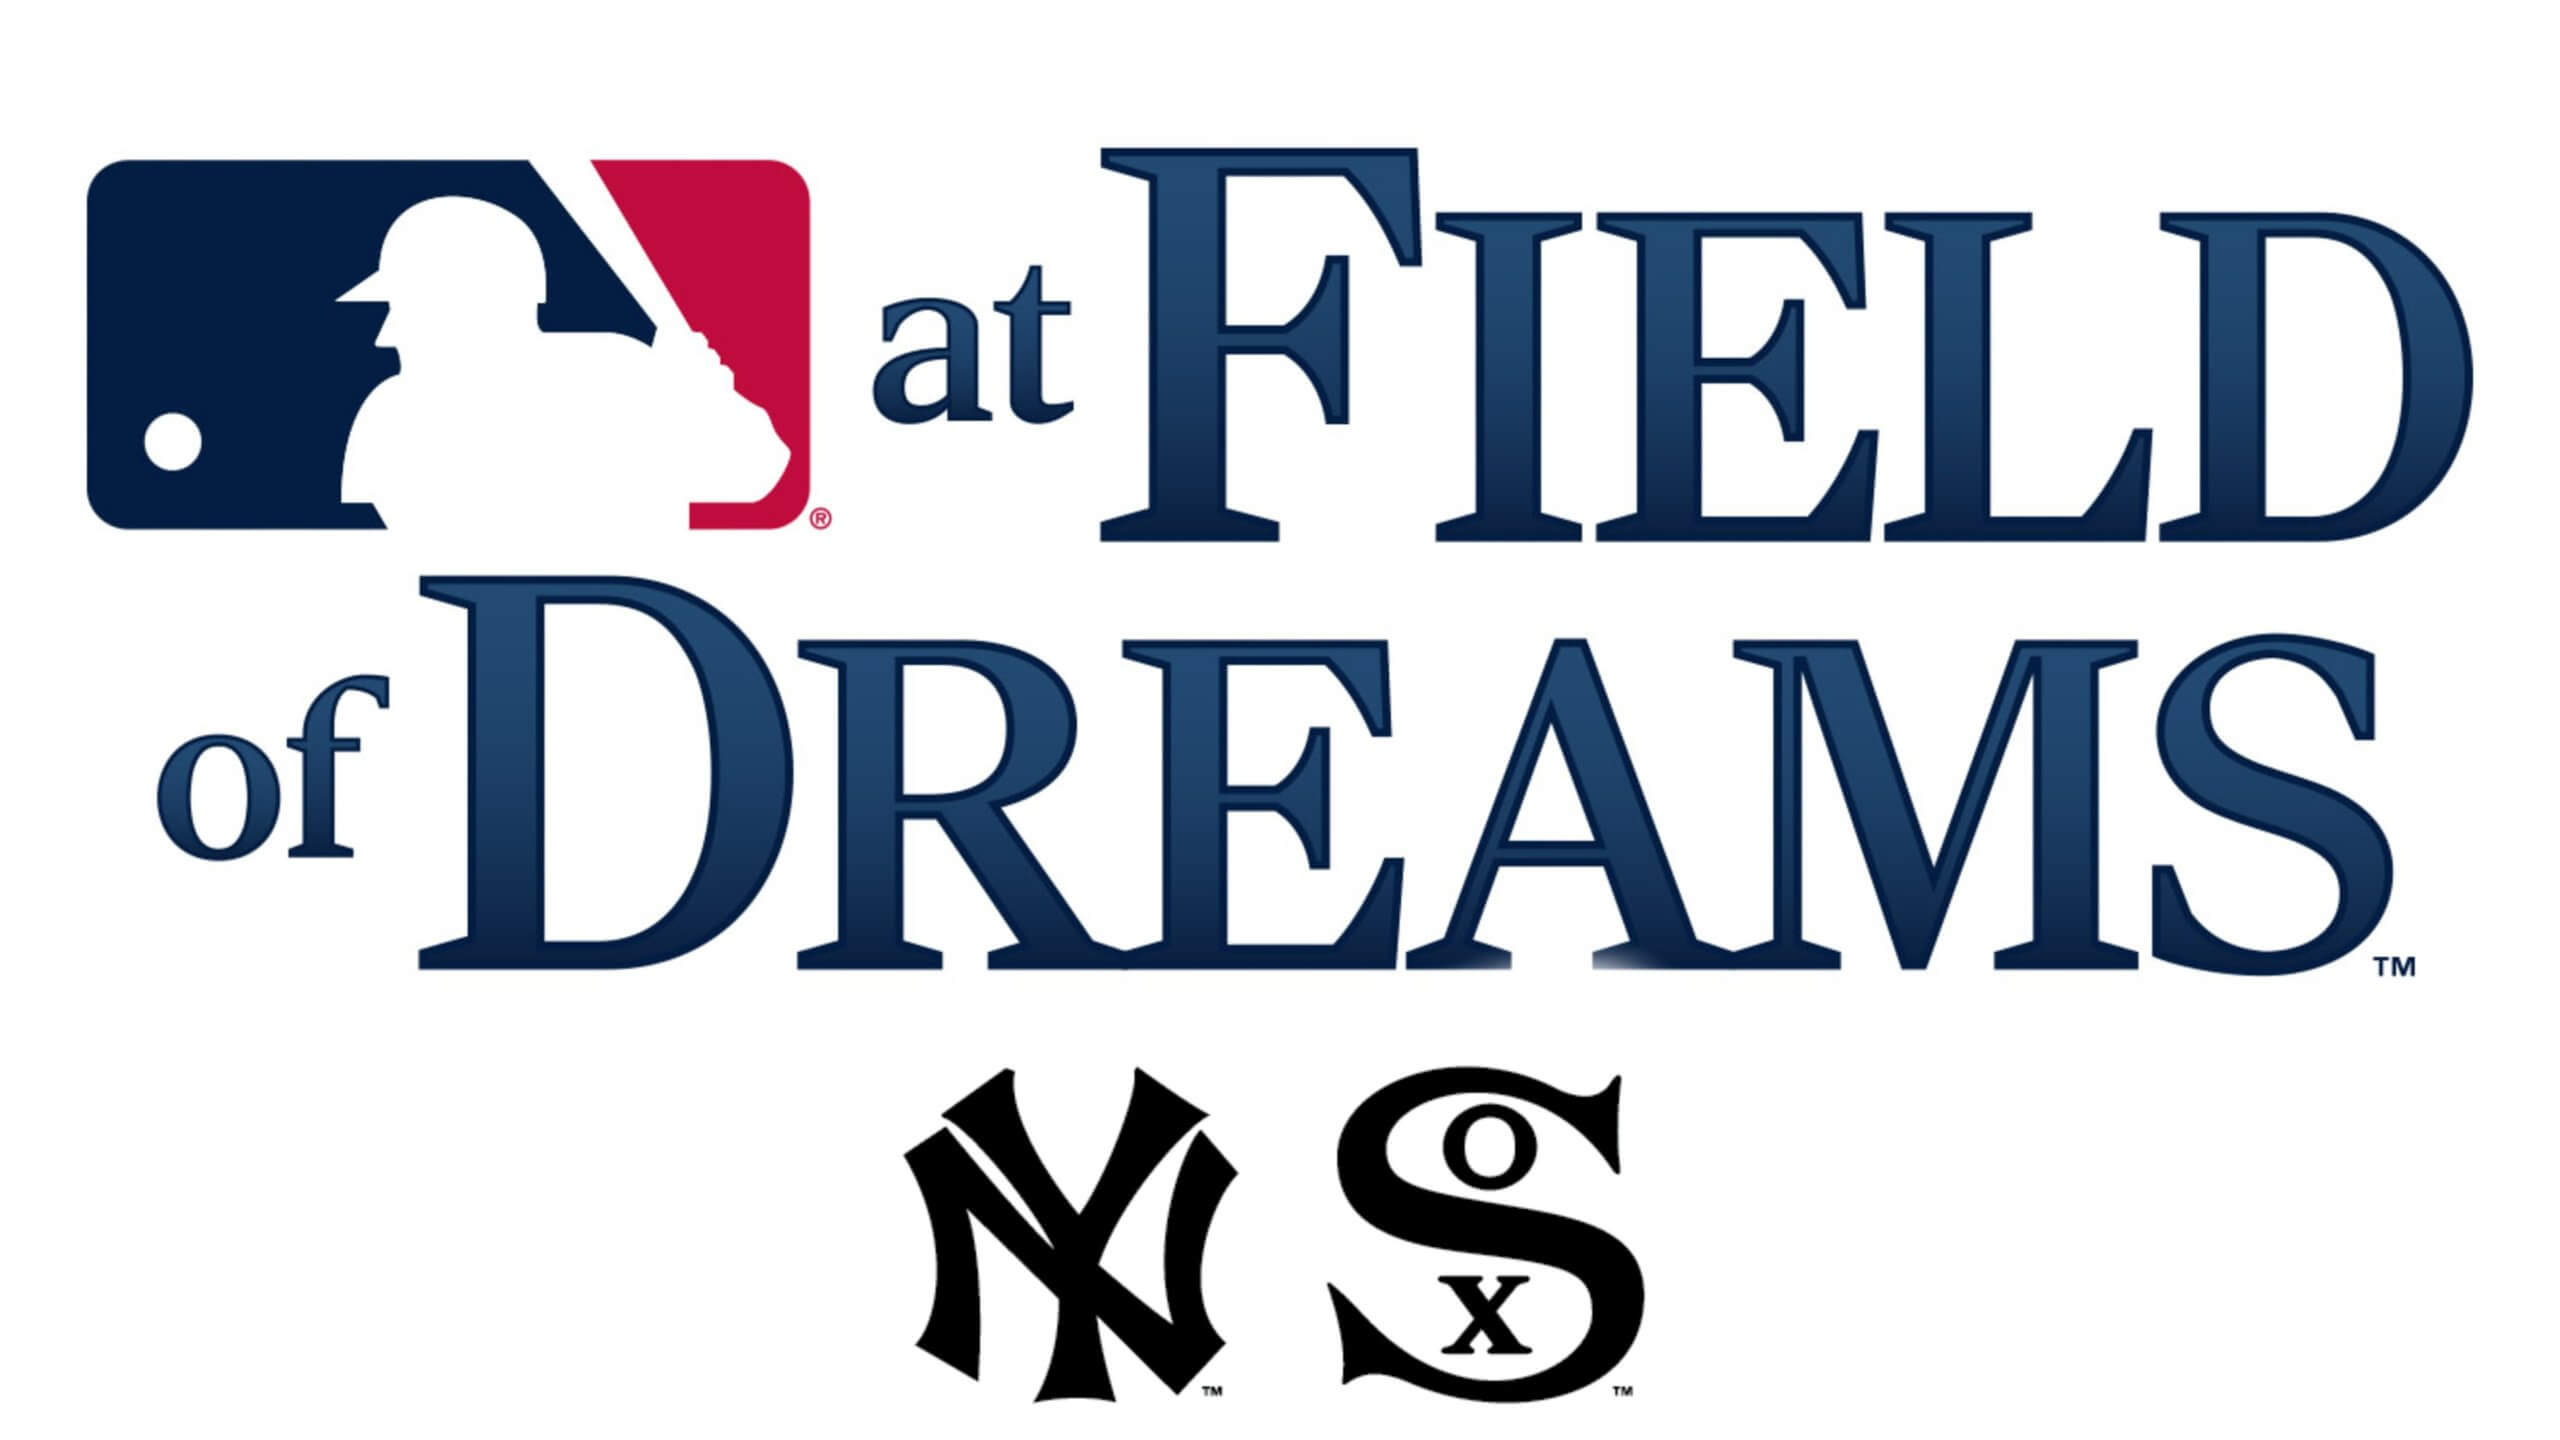 White Sox-Yankees 'Field of Dreams' remake captures baseball fans